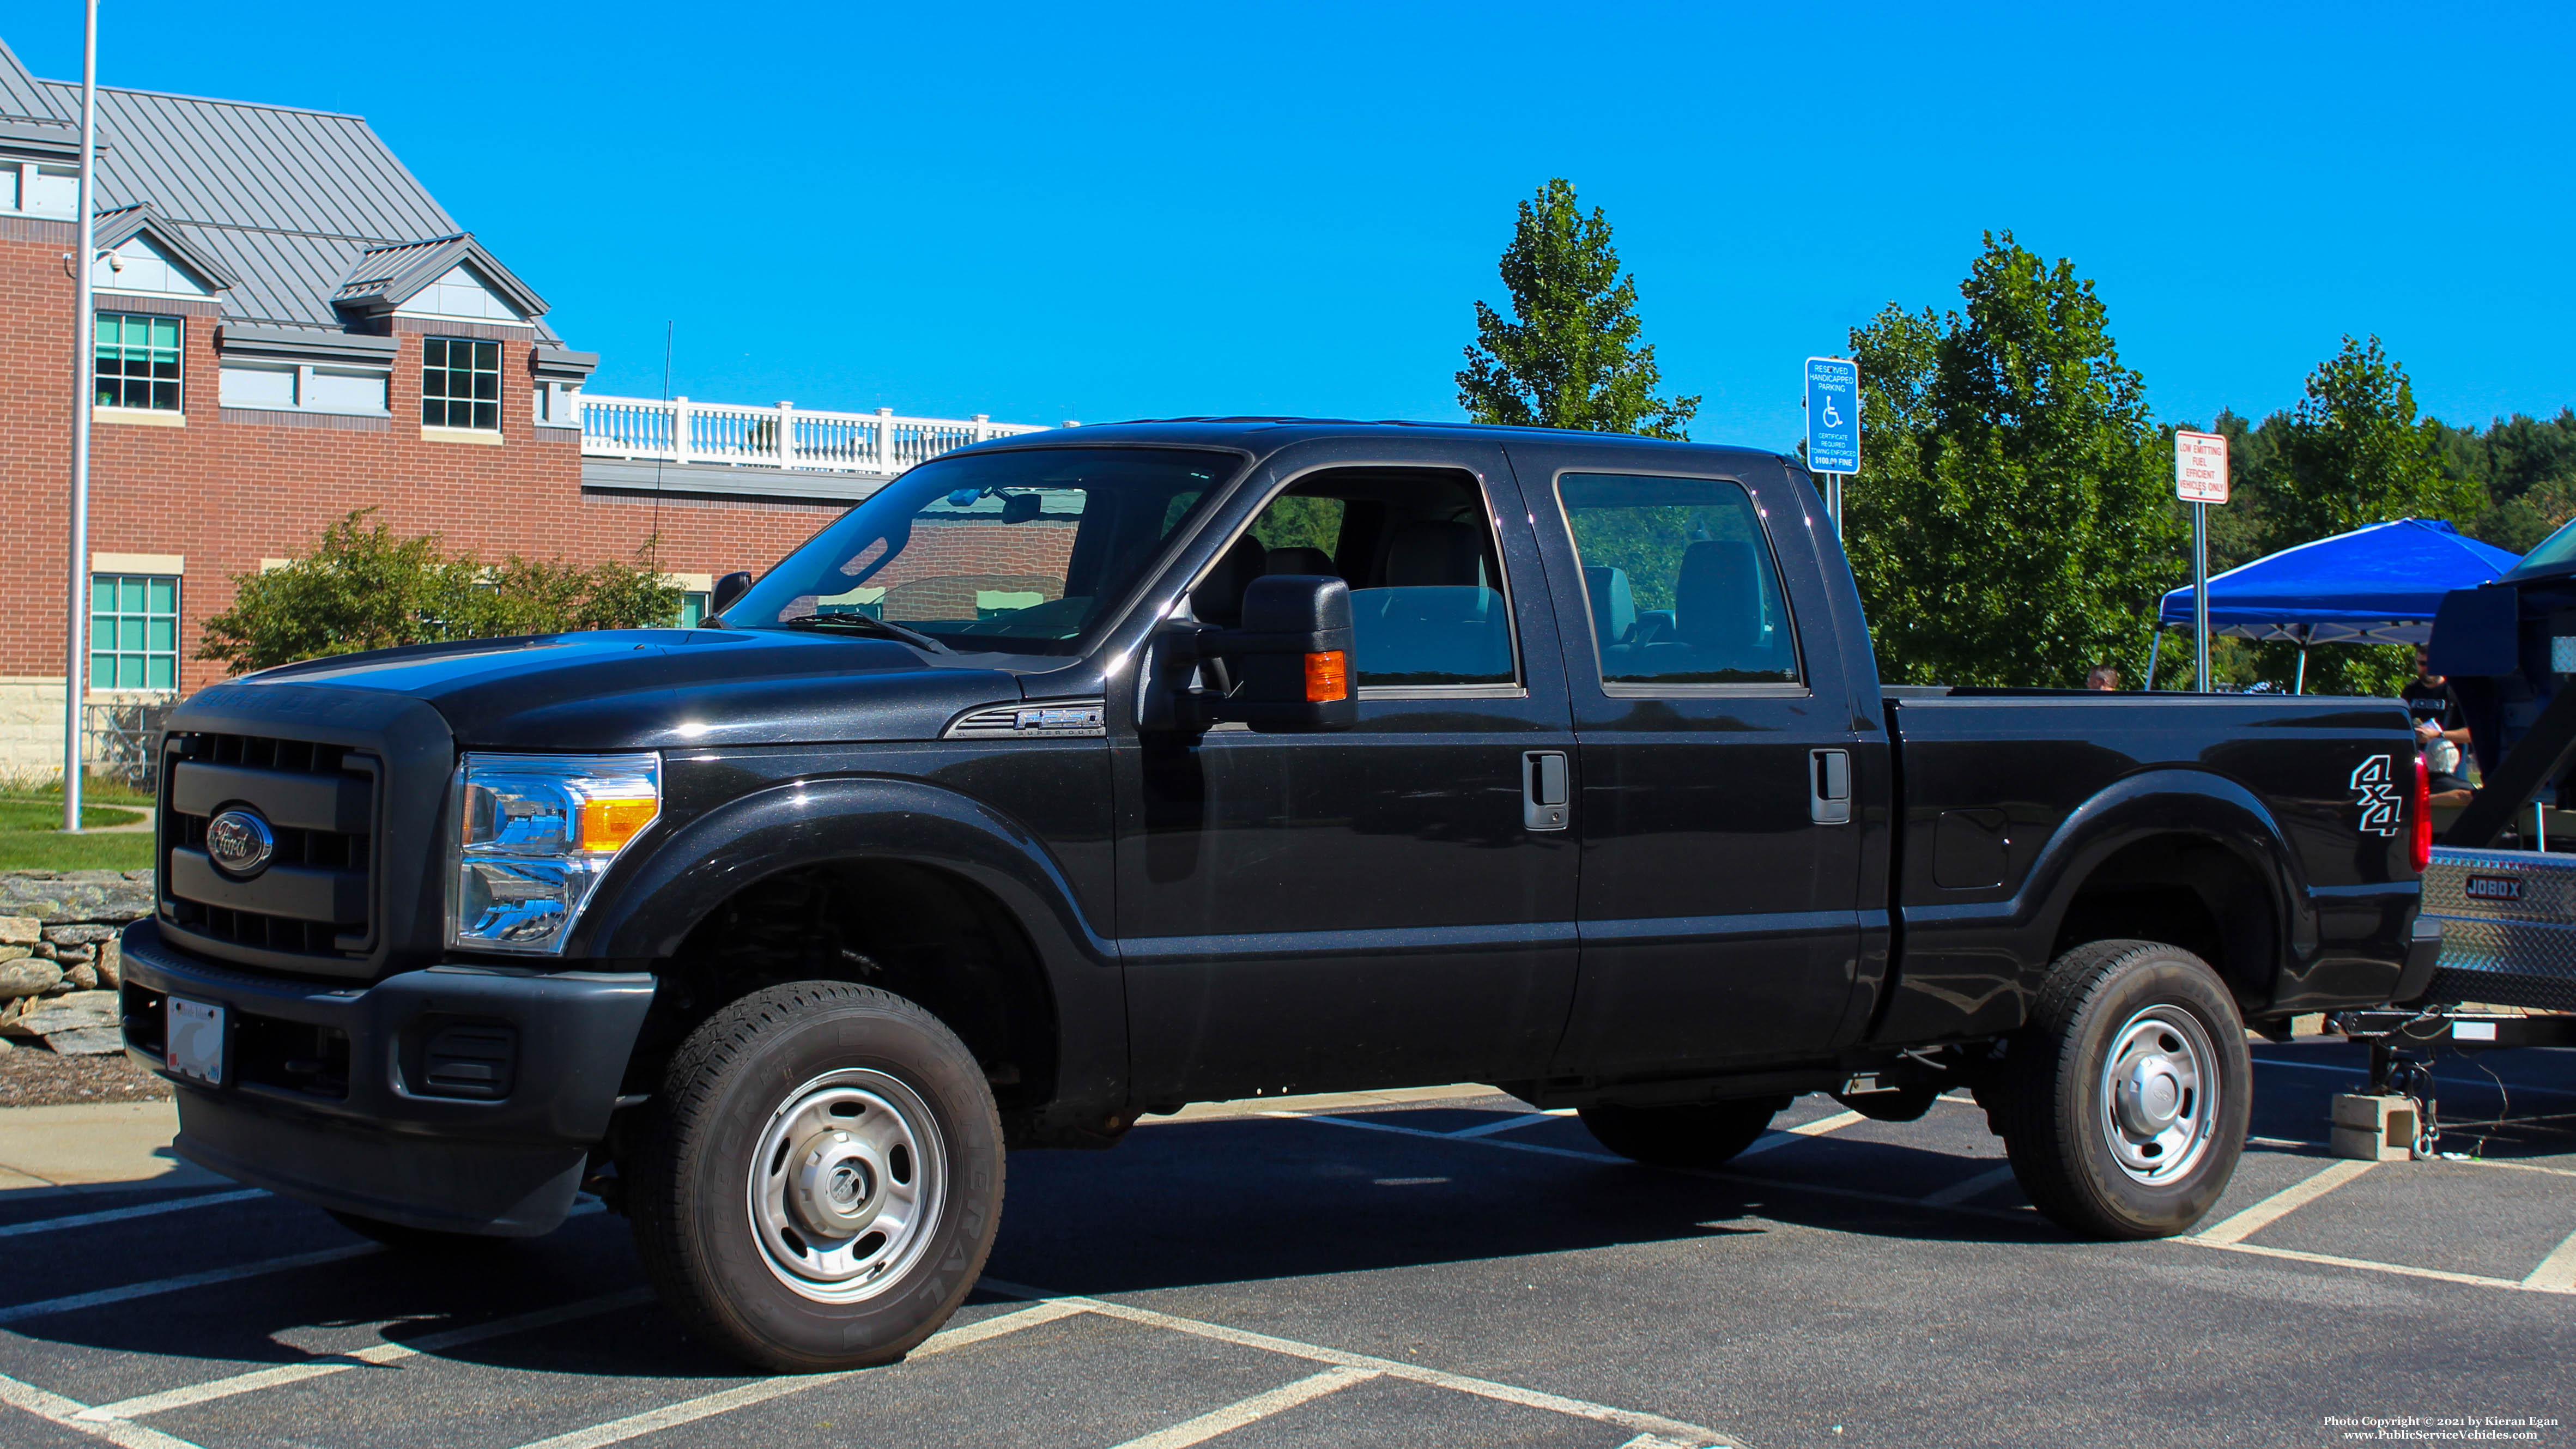 A photo  of Rhode Island State Police
            Unmarked Unit, a 2011-2016 Ford F-250 Crew Cab             taken by Kieran Egan